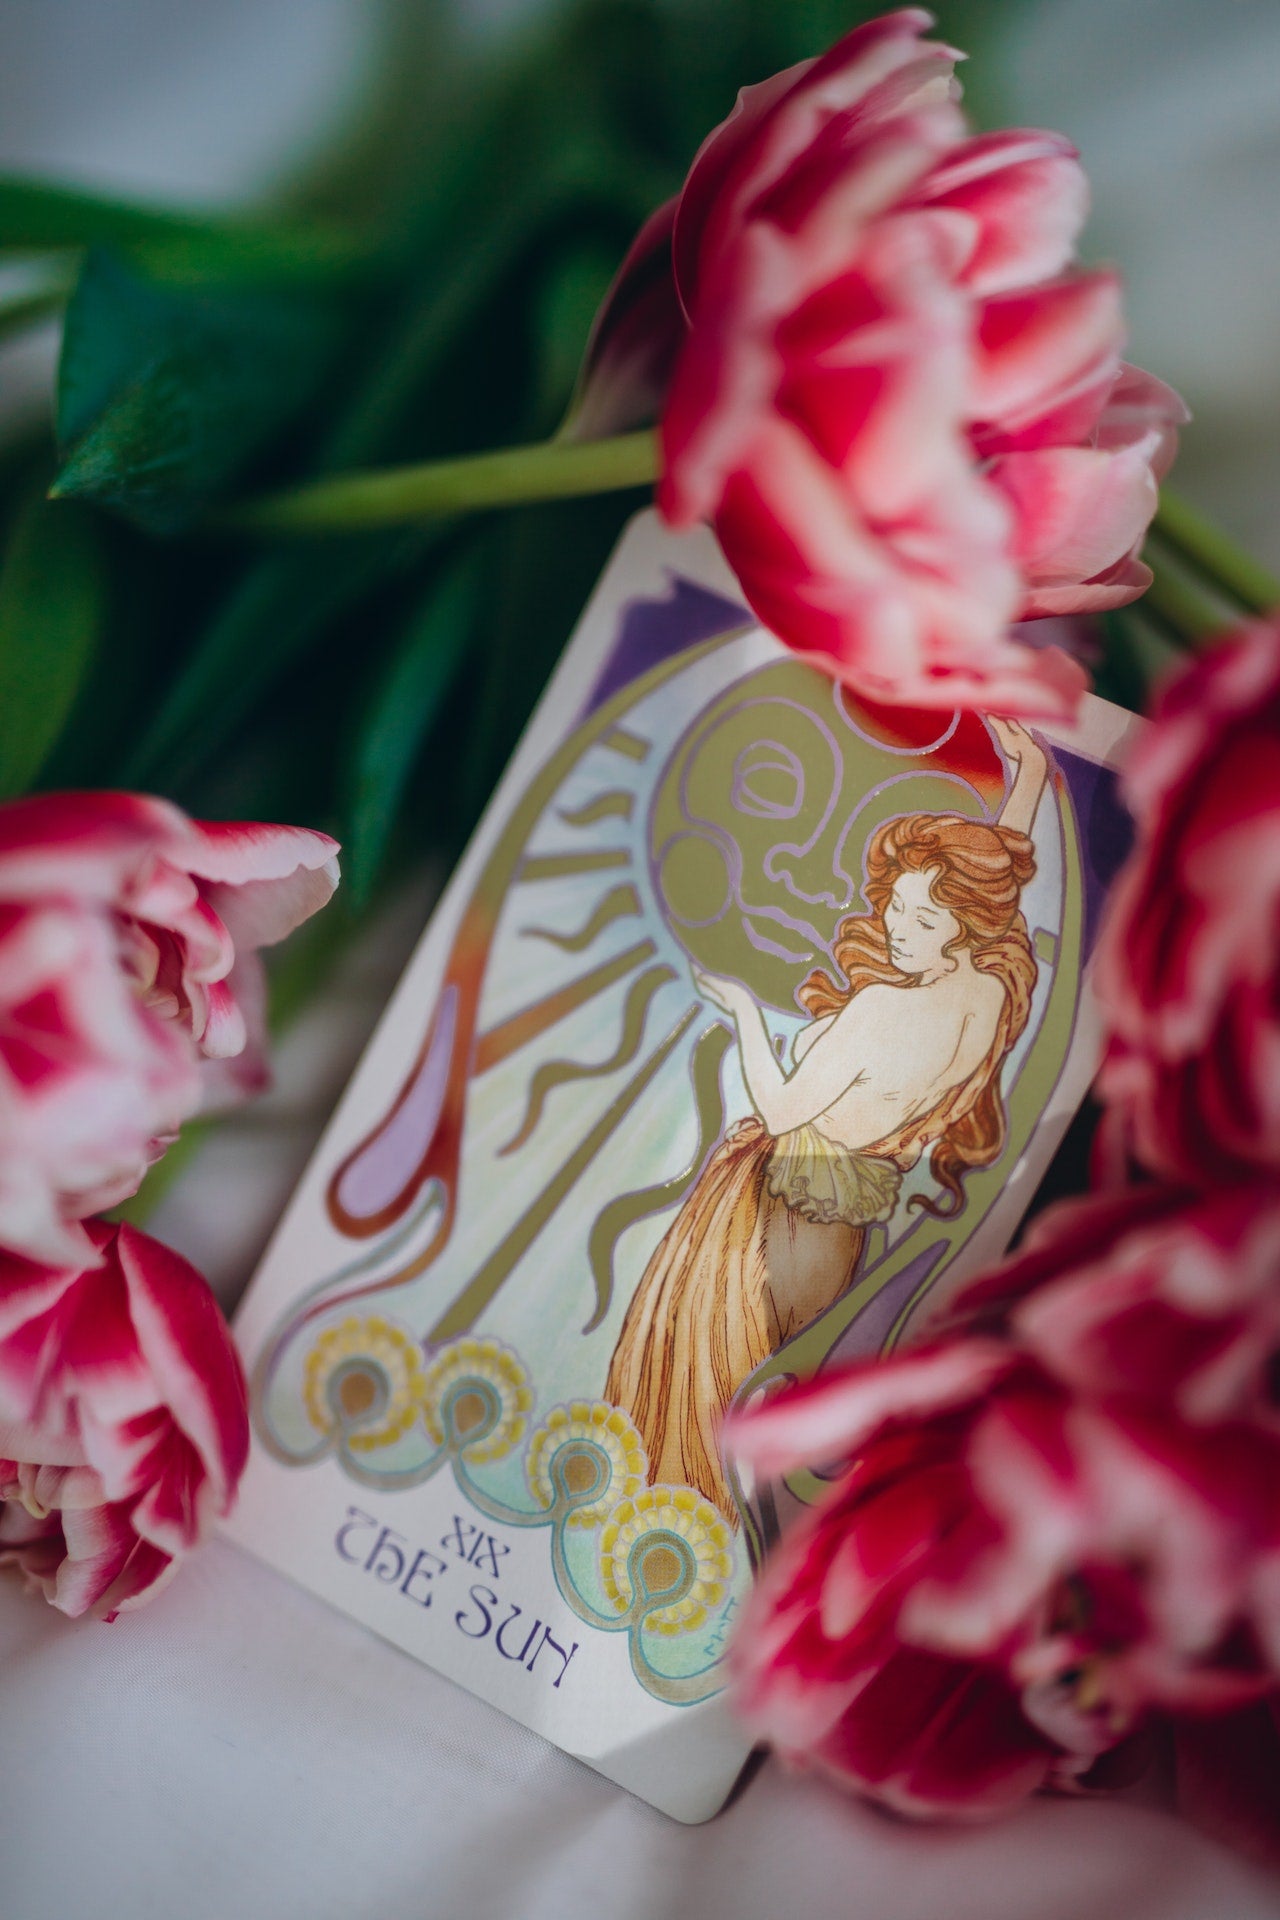 Tarot and Meditation: Deepening Your Connection to the Cards through Mindfulness